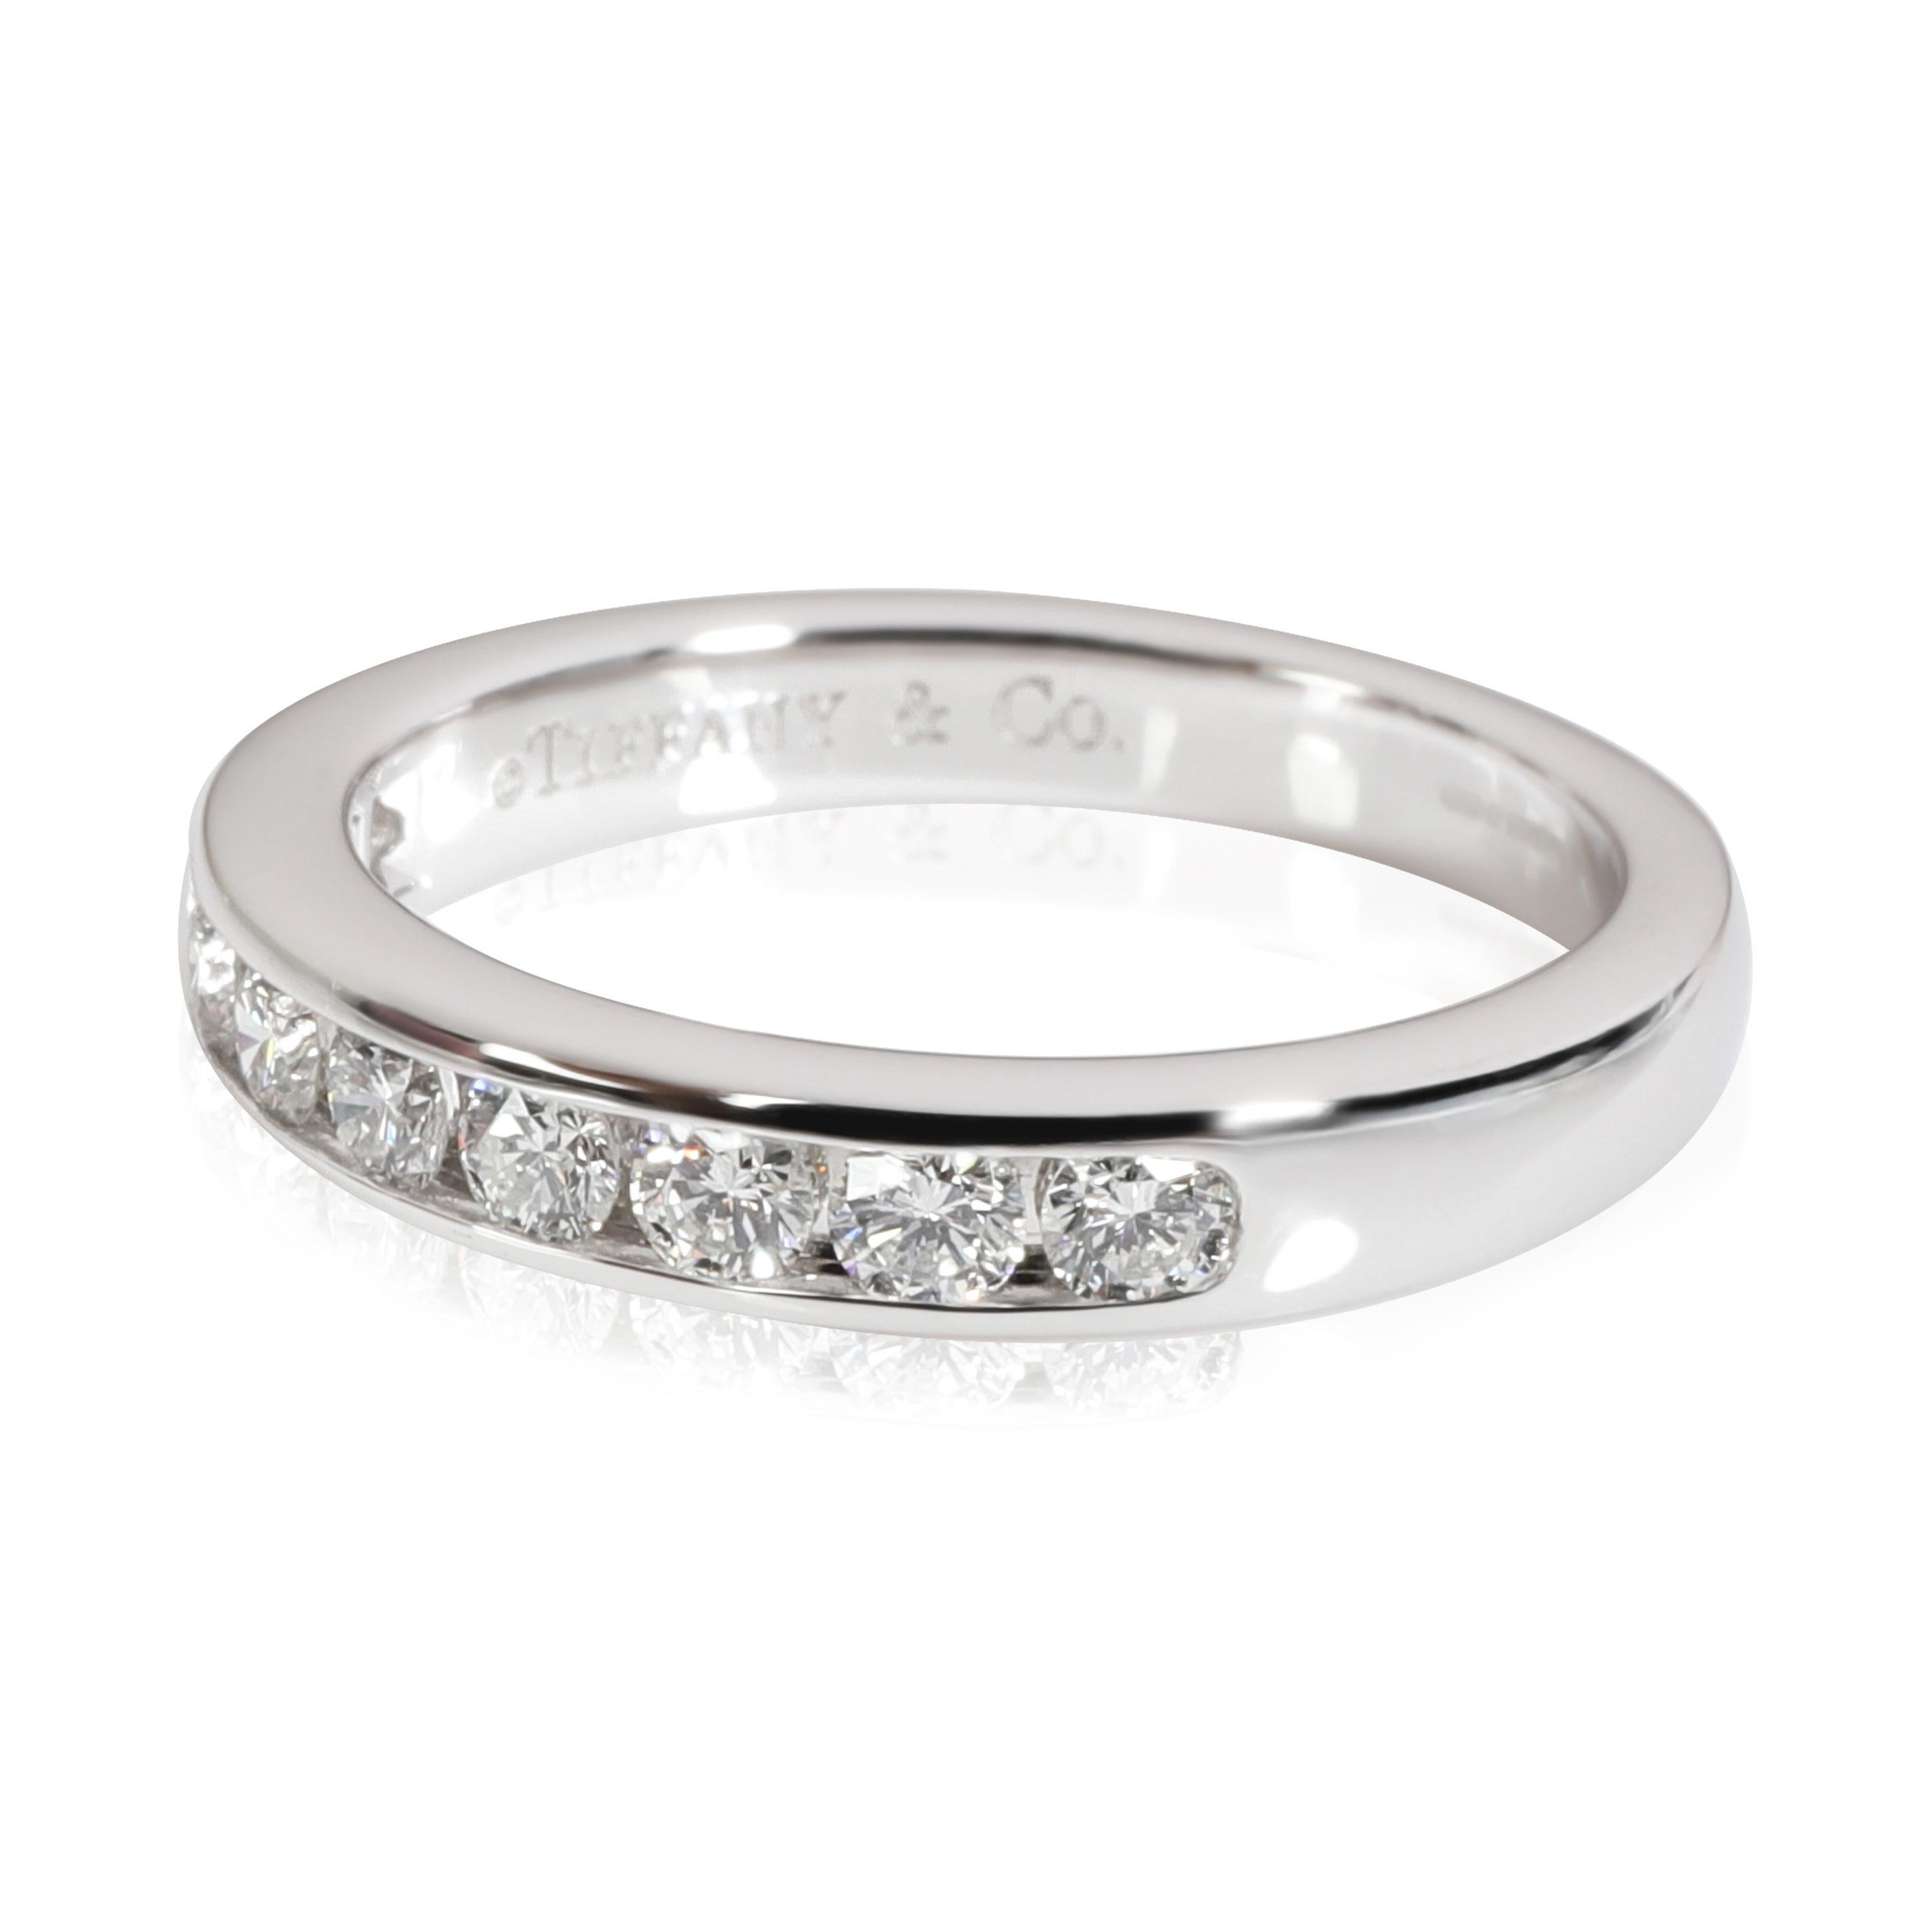 Tiffany & Co. Channel Set Diamond Wedding Band in Platinum 0.35 CTW In Excellent Condition For Sale In New York, NY